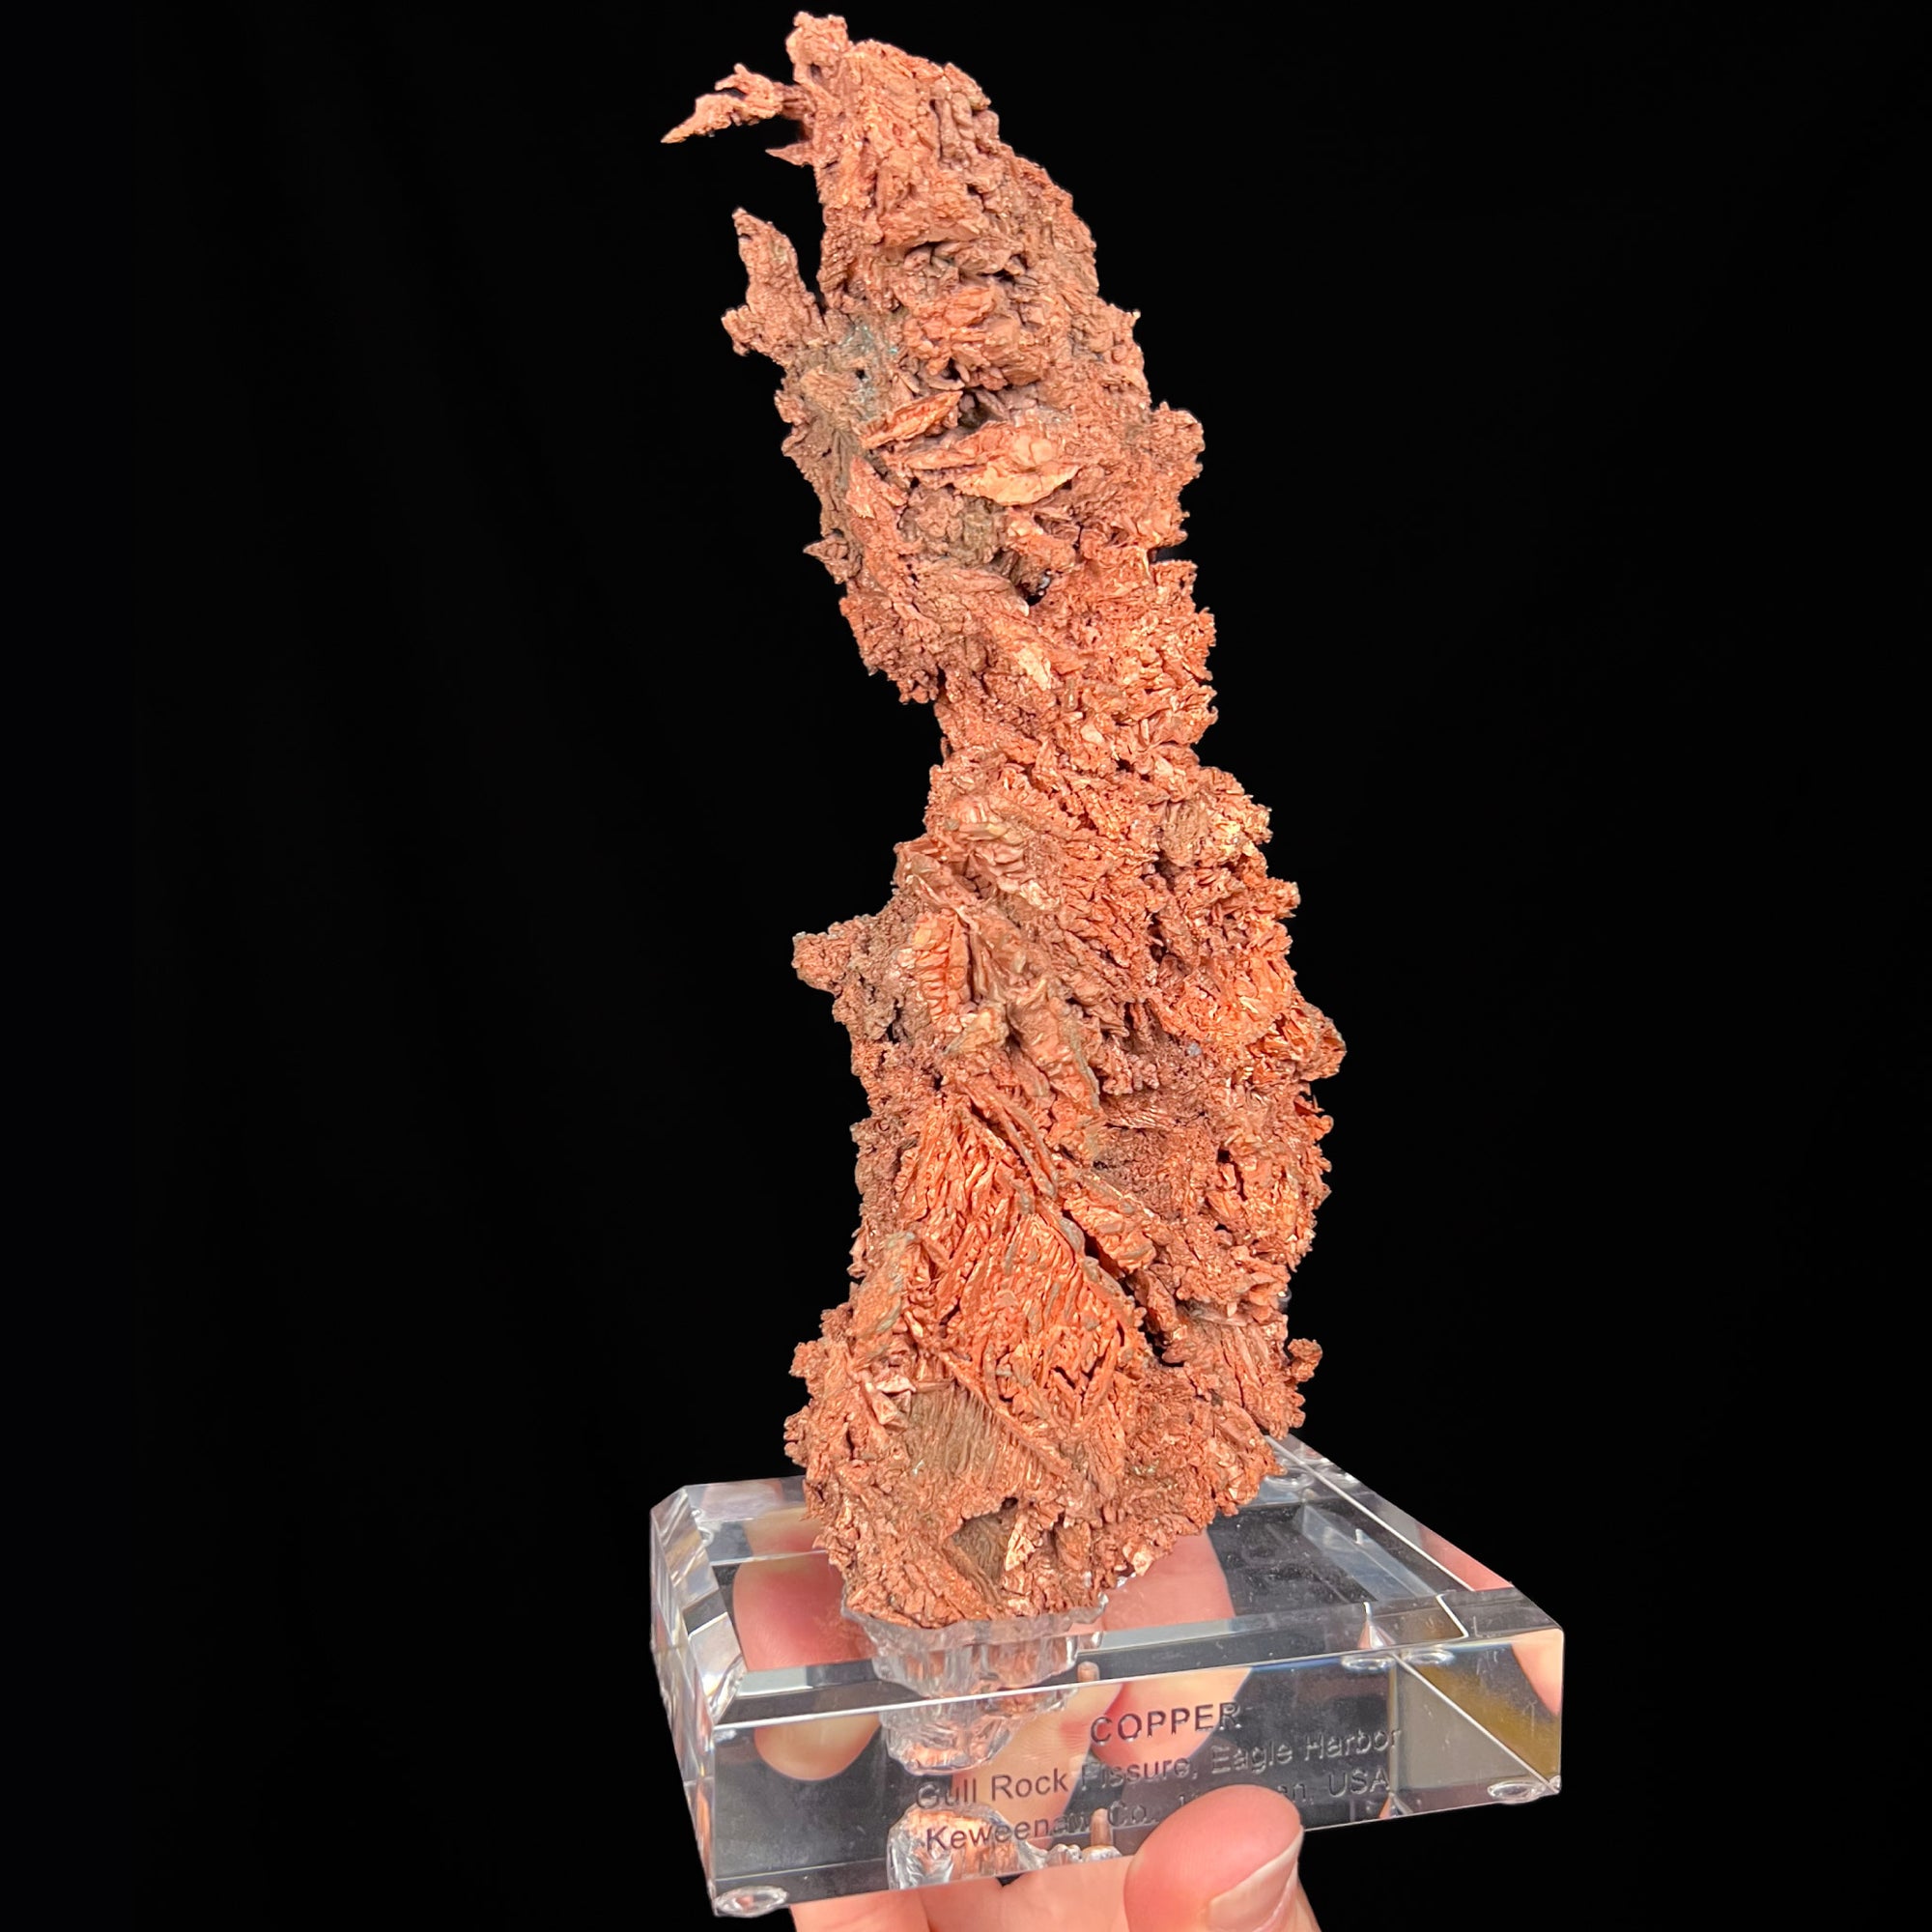 Extra Large Native Copper from Gull Rock Fissure, Eagle Harbor, Michigan